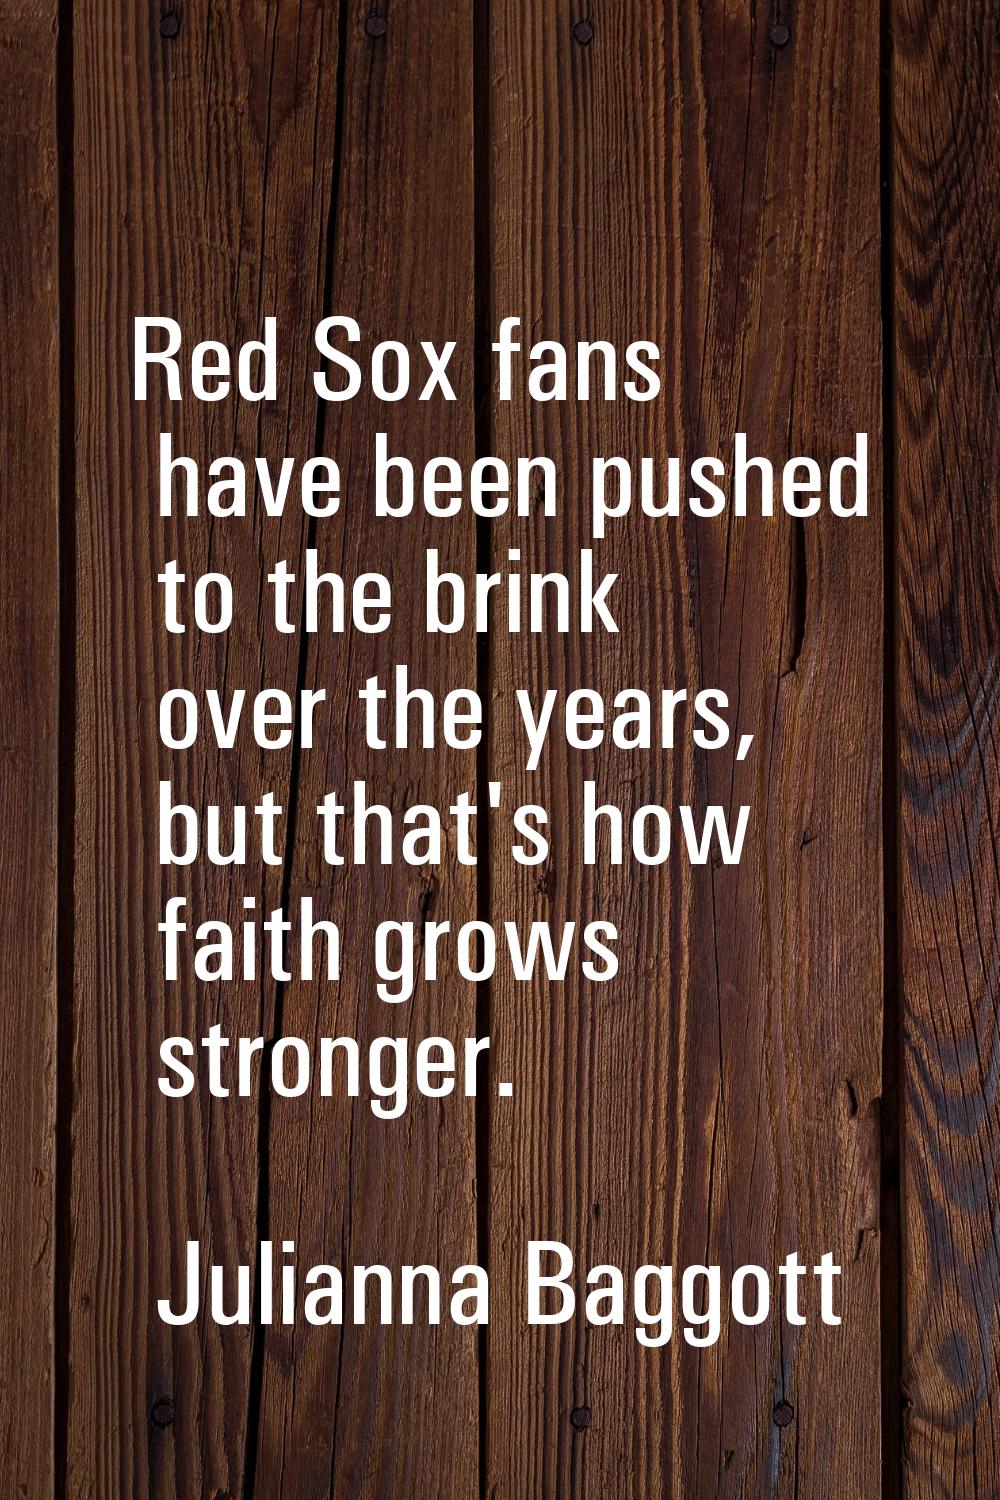 Red Sox fans have been pushed to the brink over the years, but that's how faith grows stronger.